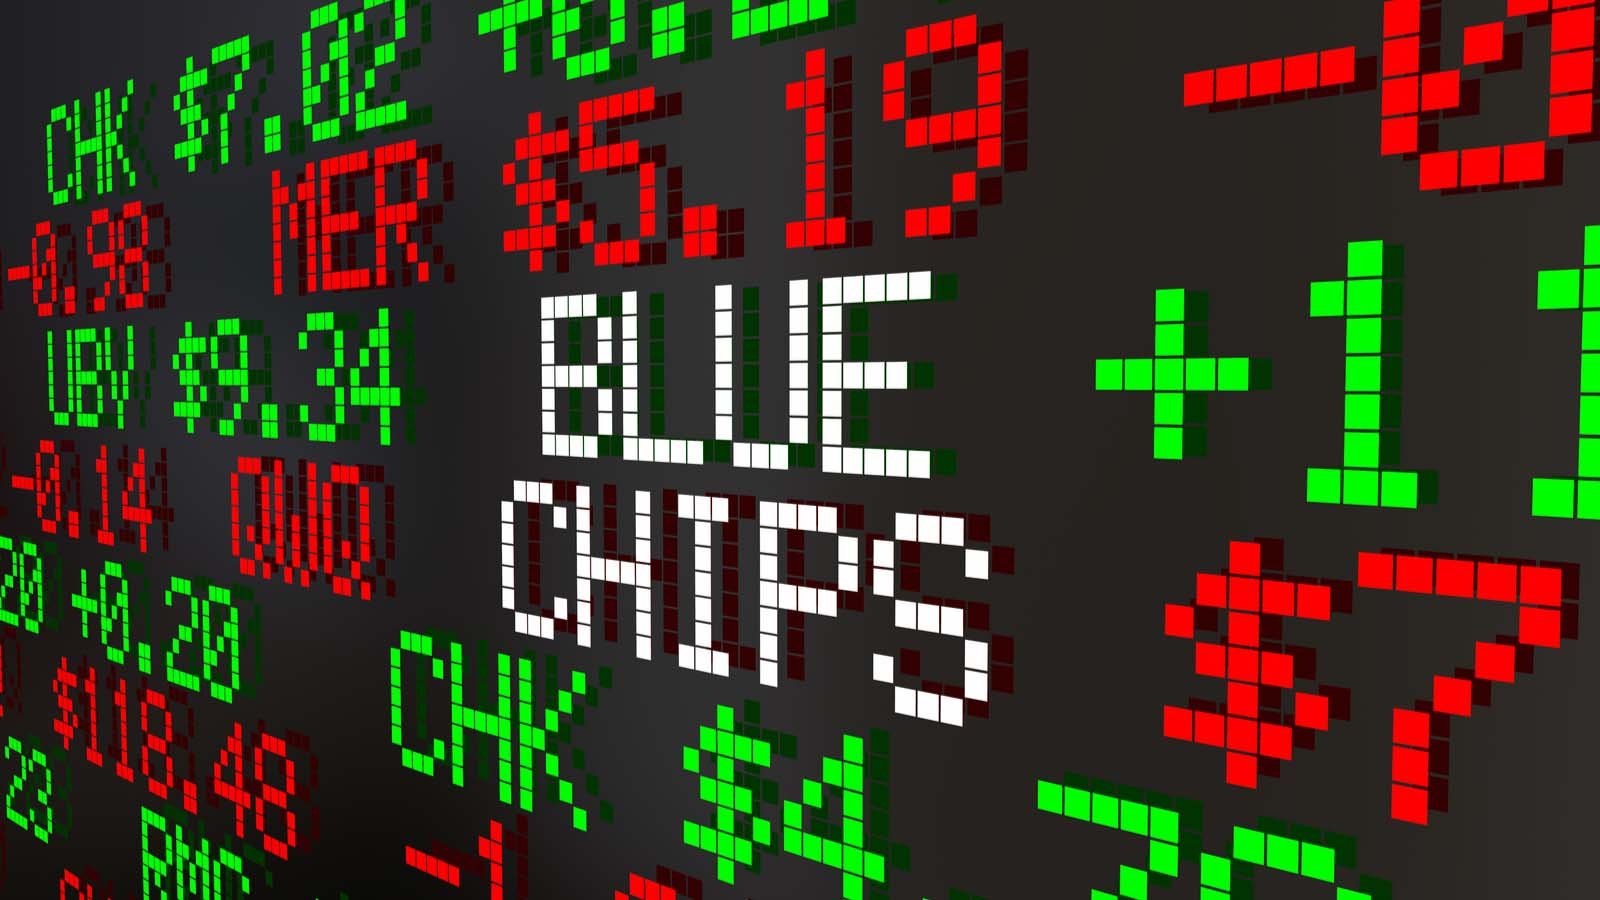 7 Blue-Chip Stocks to Buy as a New Bull Market Emerges